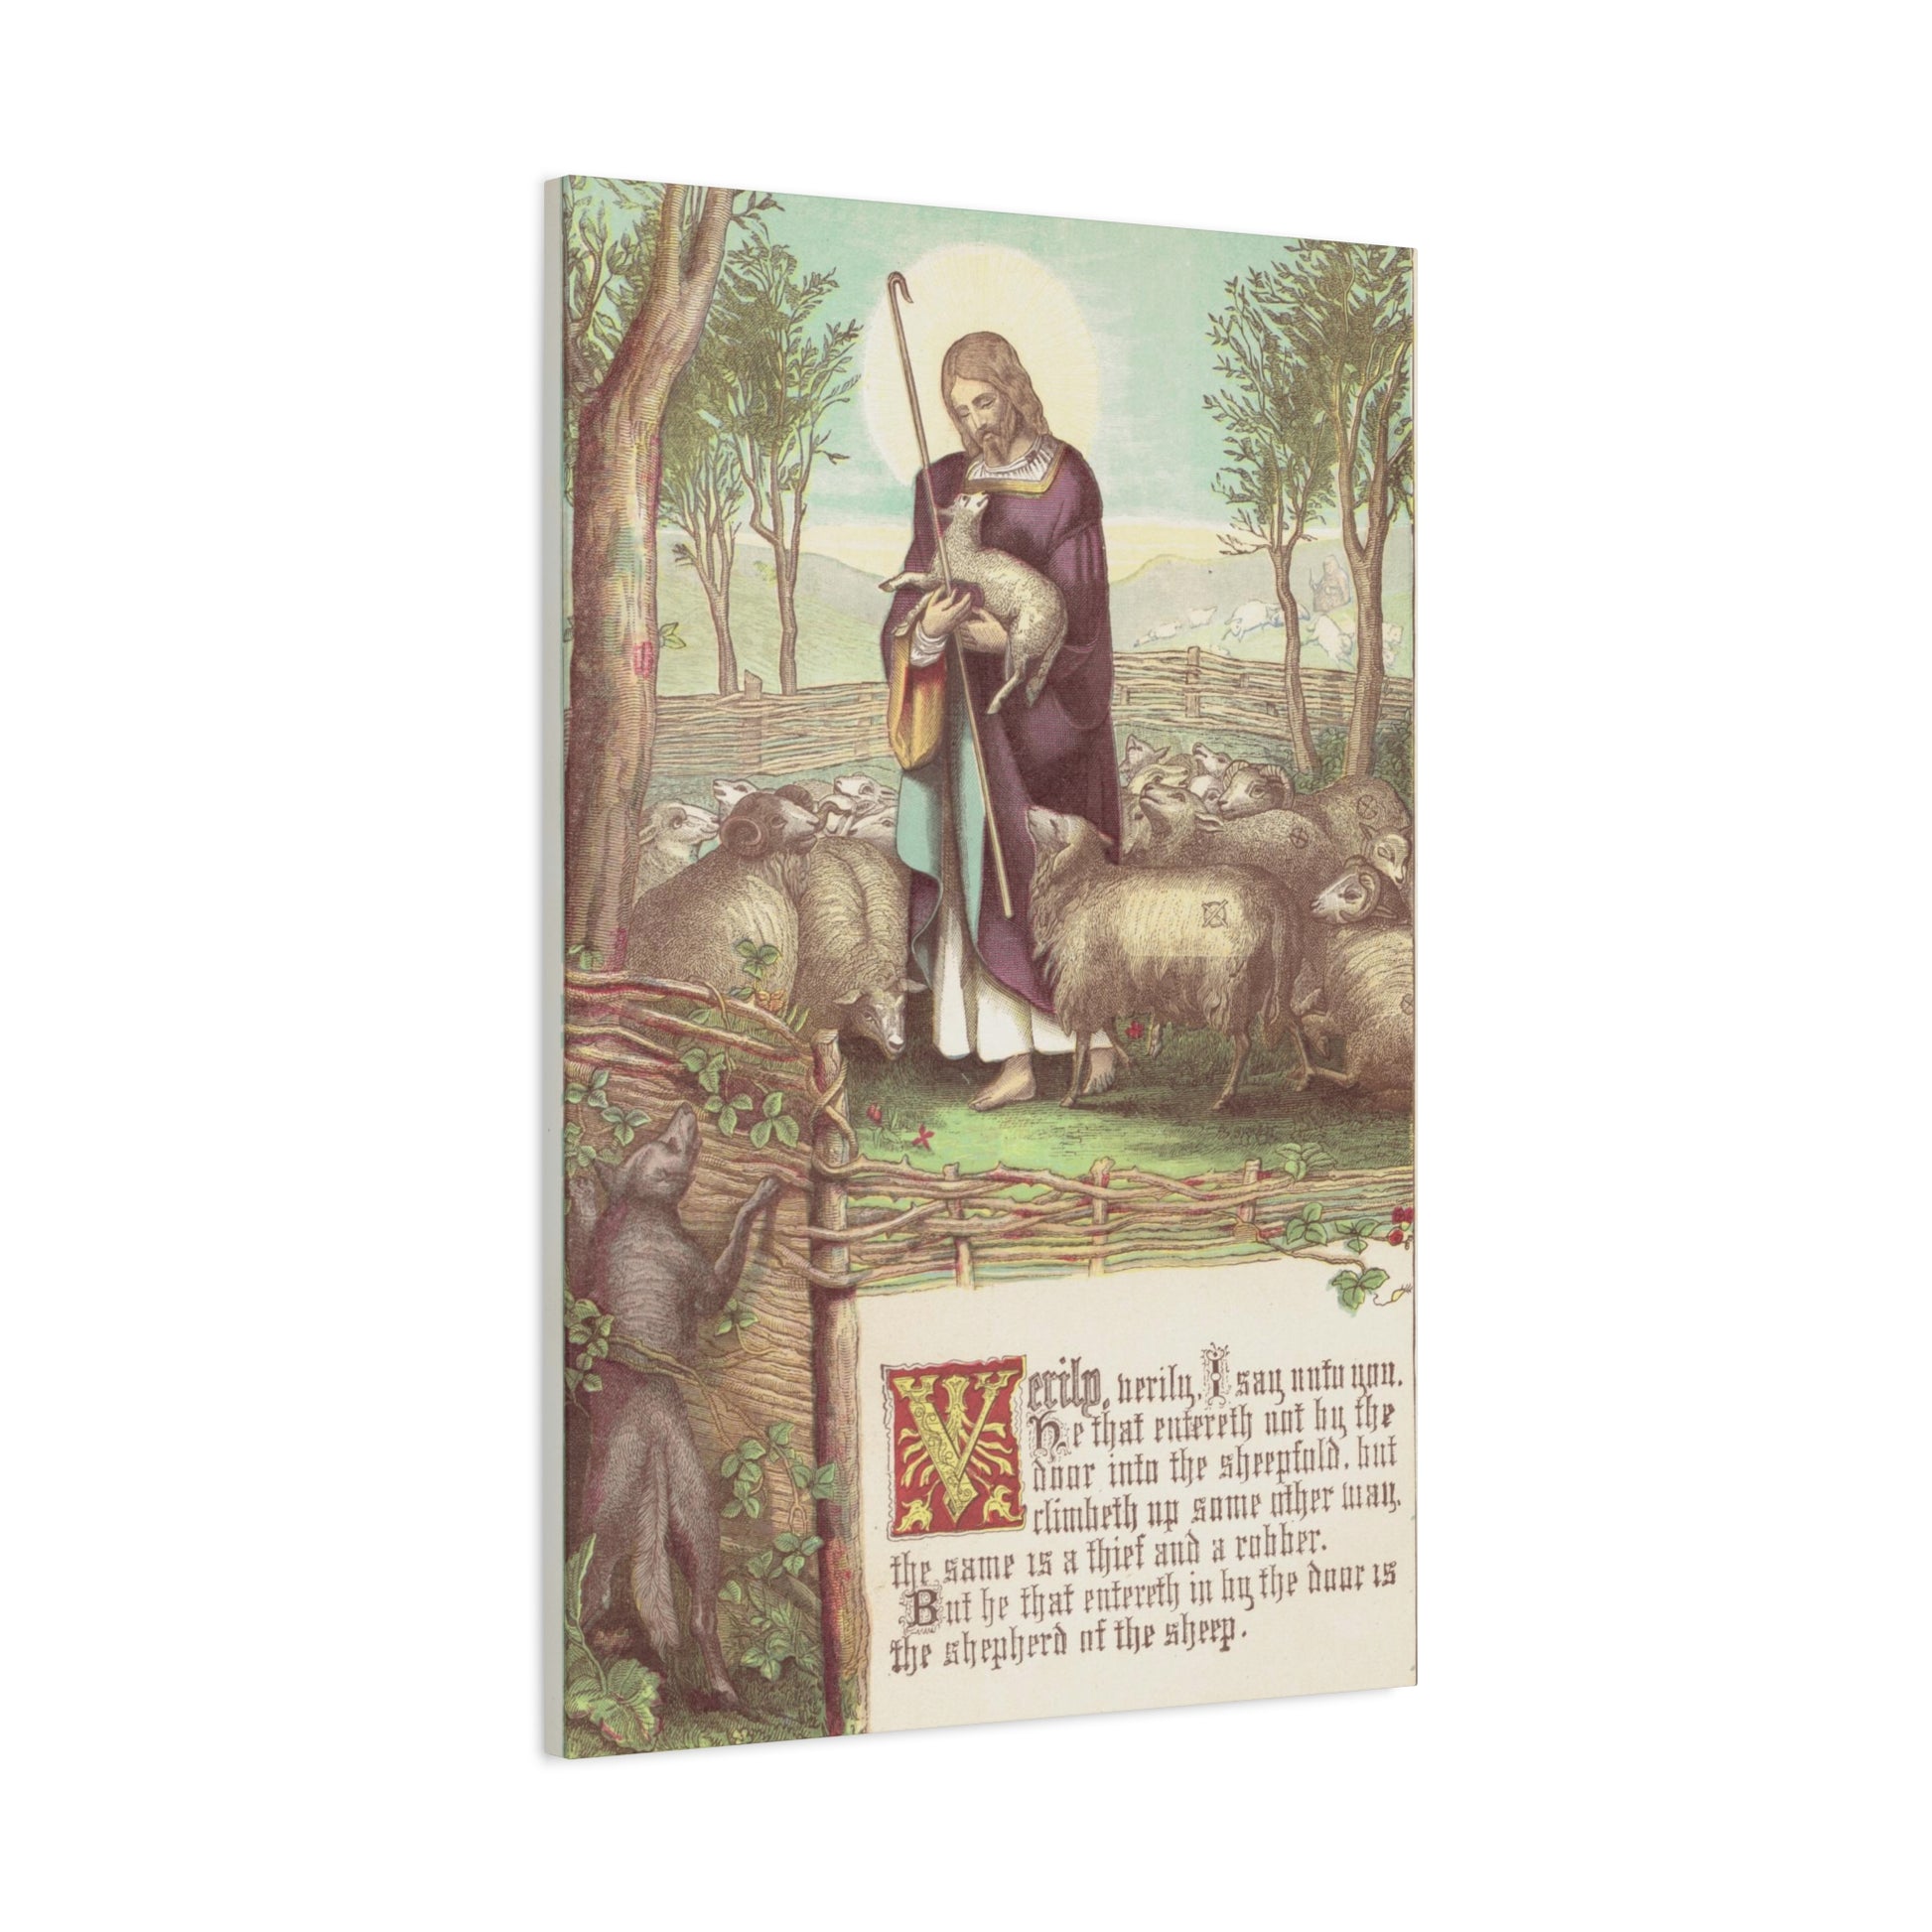 Image of Jesus Christ as the Good Shepherd in robes, holding a lamb, with a flock of sheep in a pastoral setting.